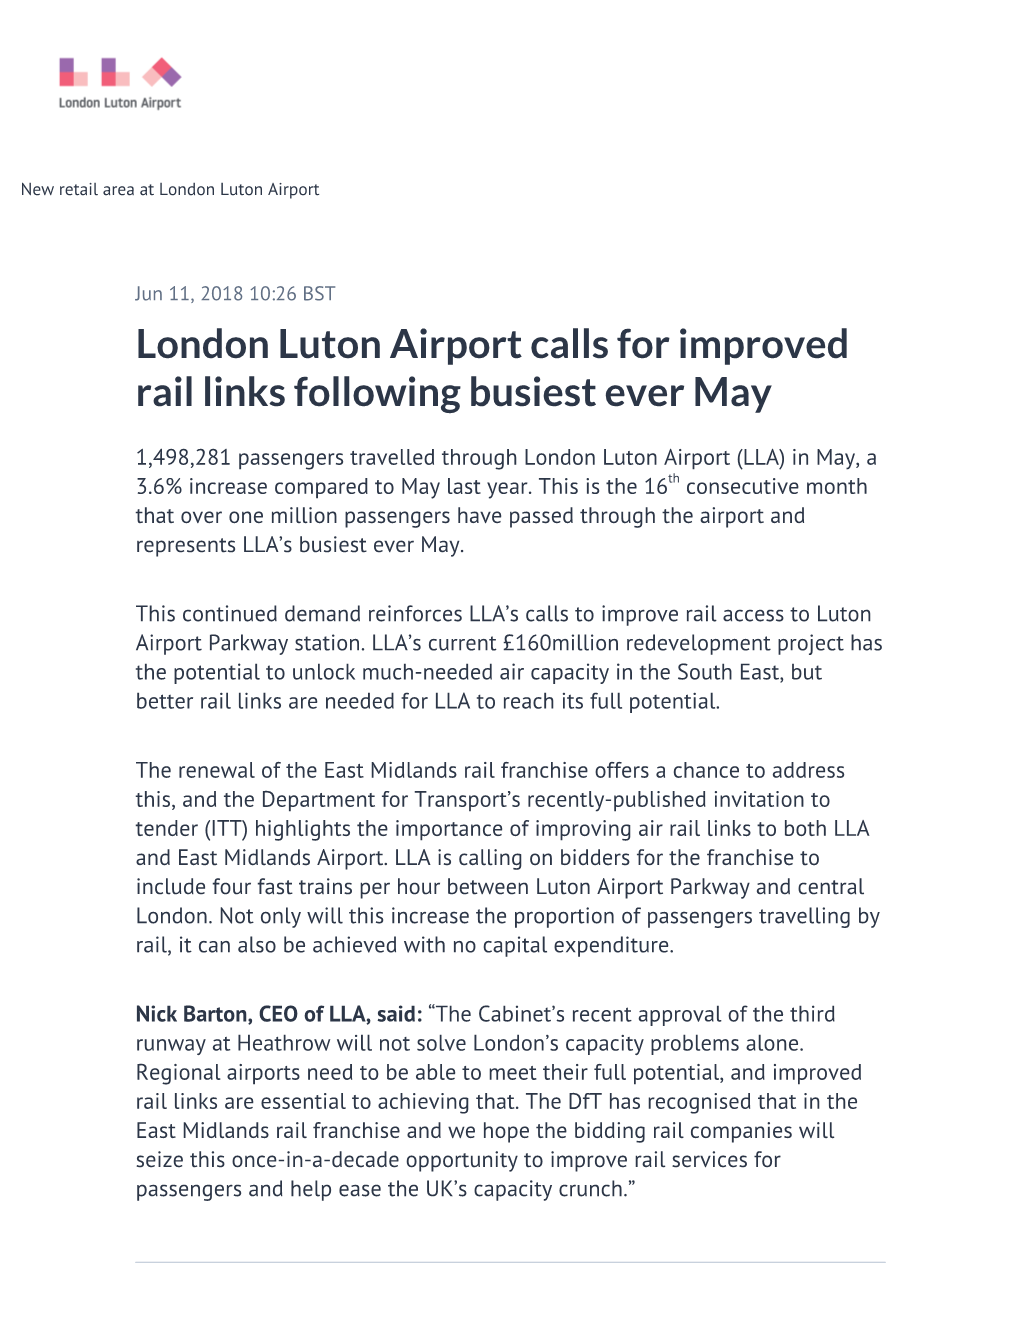 London Luton Airport Calls for Improved Rail Links Following Busiest Ever May